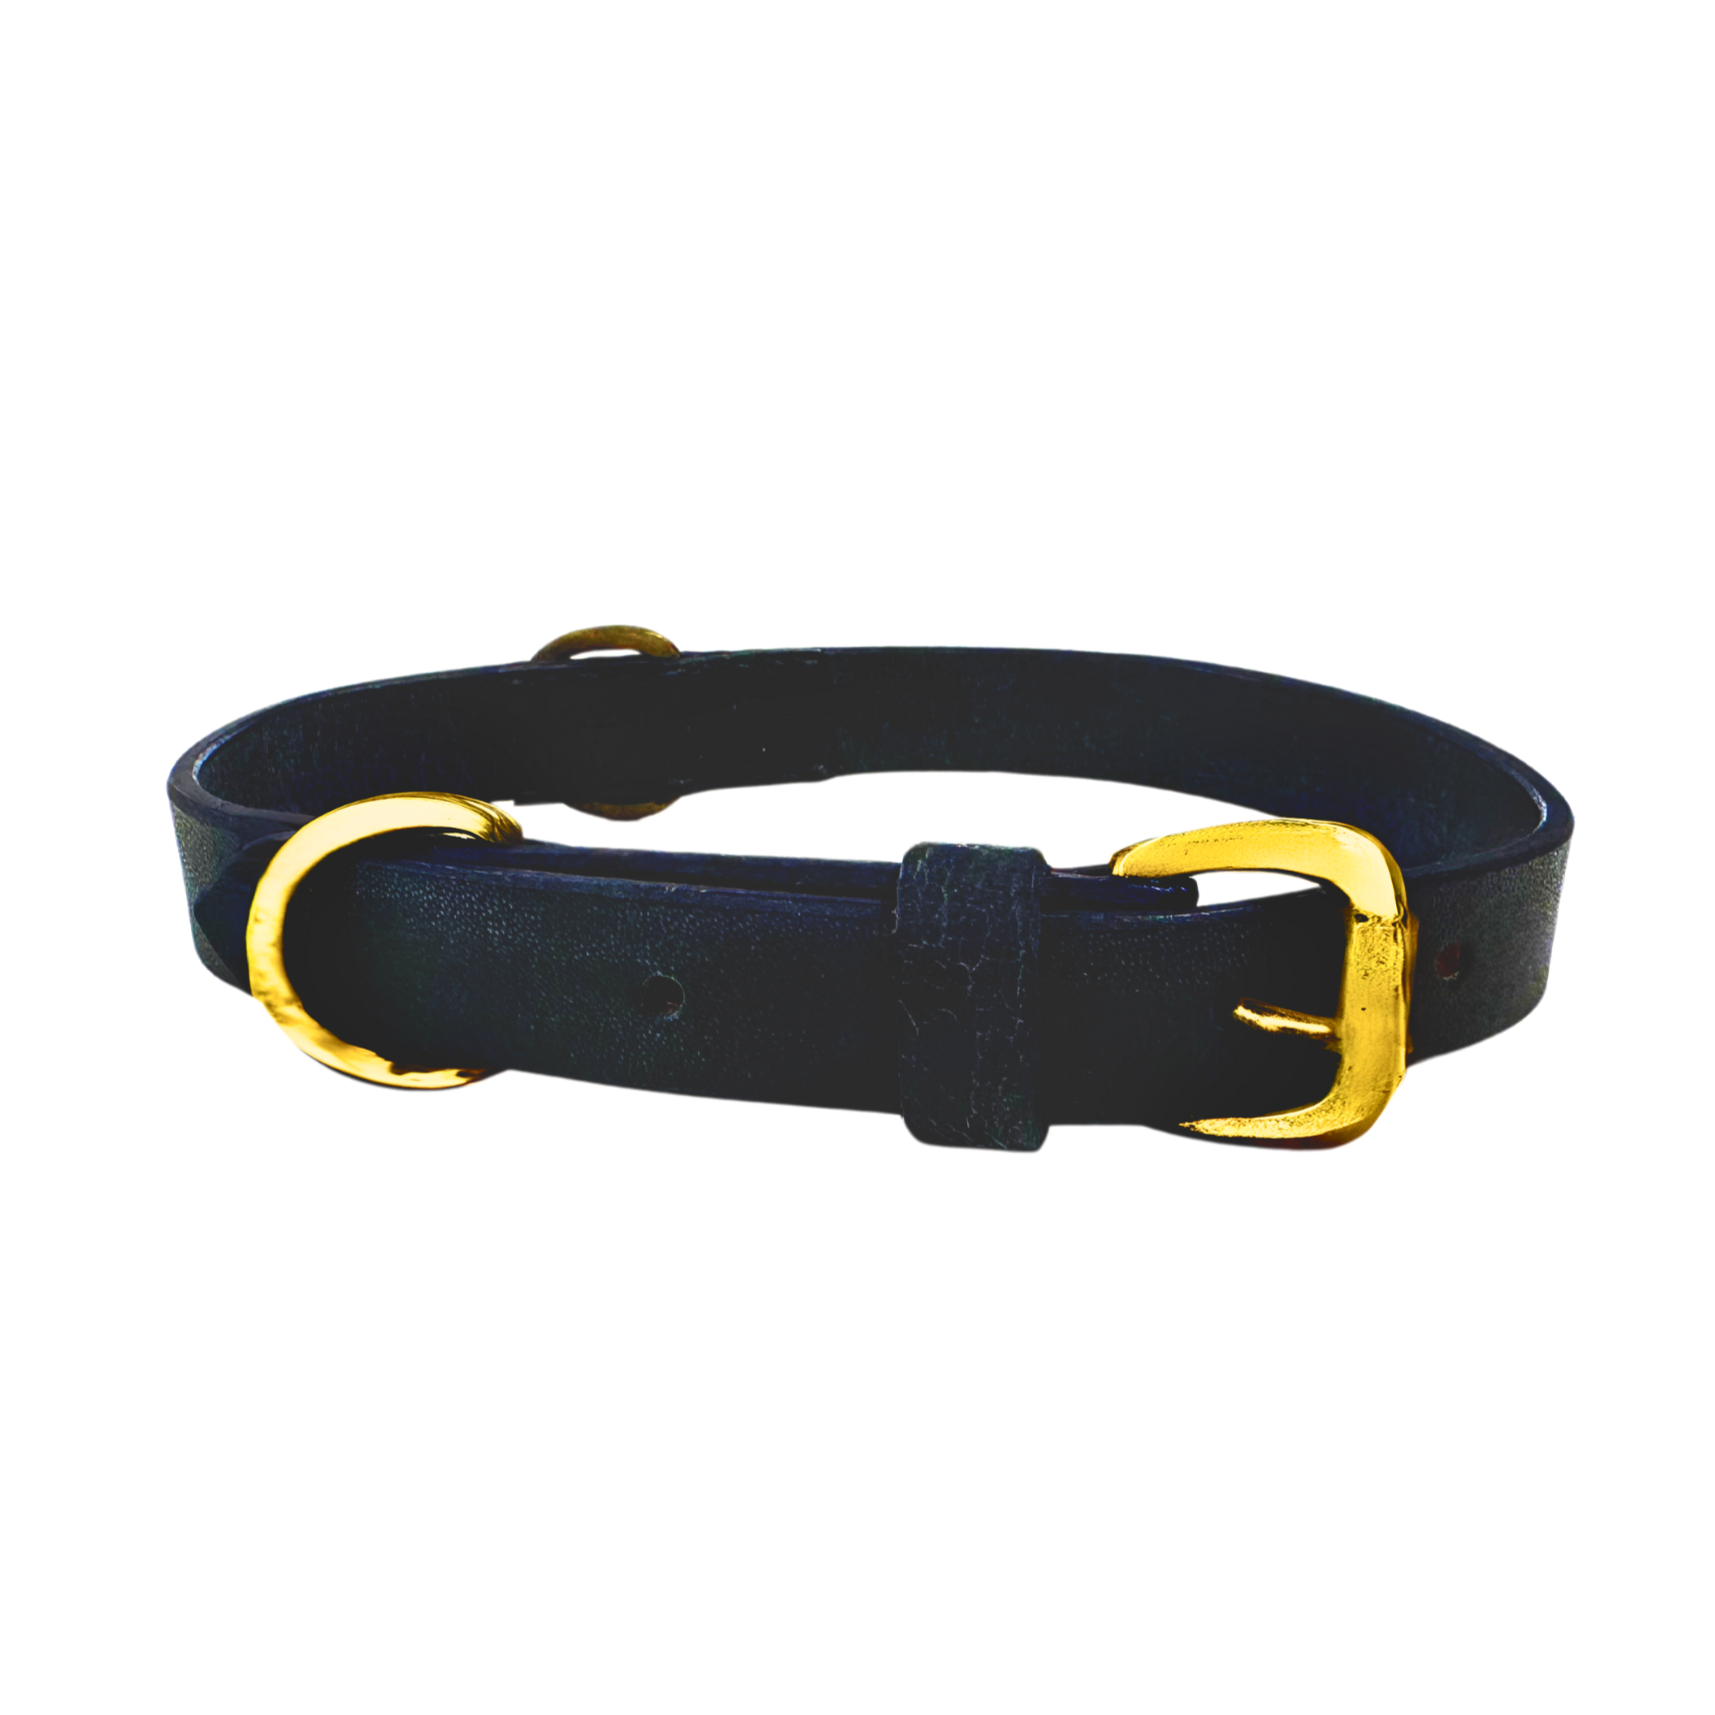 A navy Bald Collar by Georgie Paws featuring smooth, high-quality Buffalo leather with a shiny gold buckle and a gold D-ring. The collar is displayed flat against a white background, showcasing its polished detailing including two small holes for size adjustments.